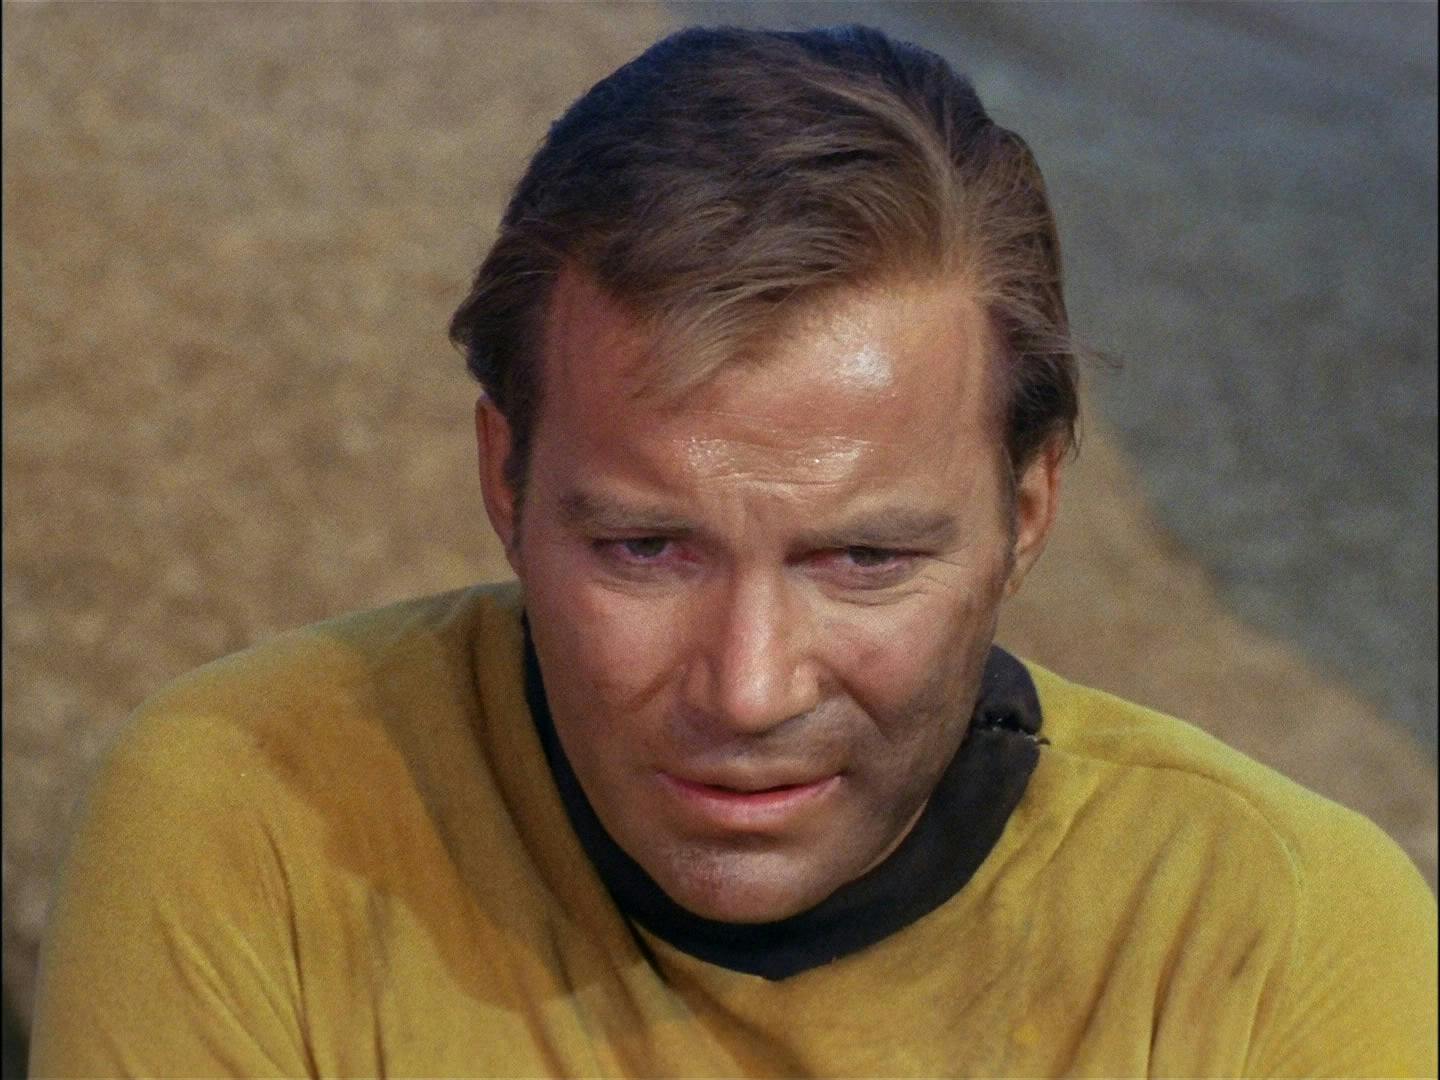 Kirk reflects on his actions and whether to spare the Gorn captain.